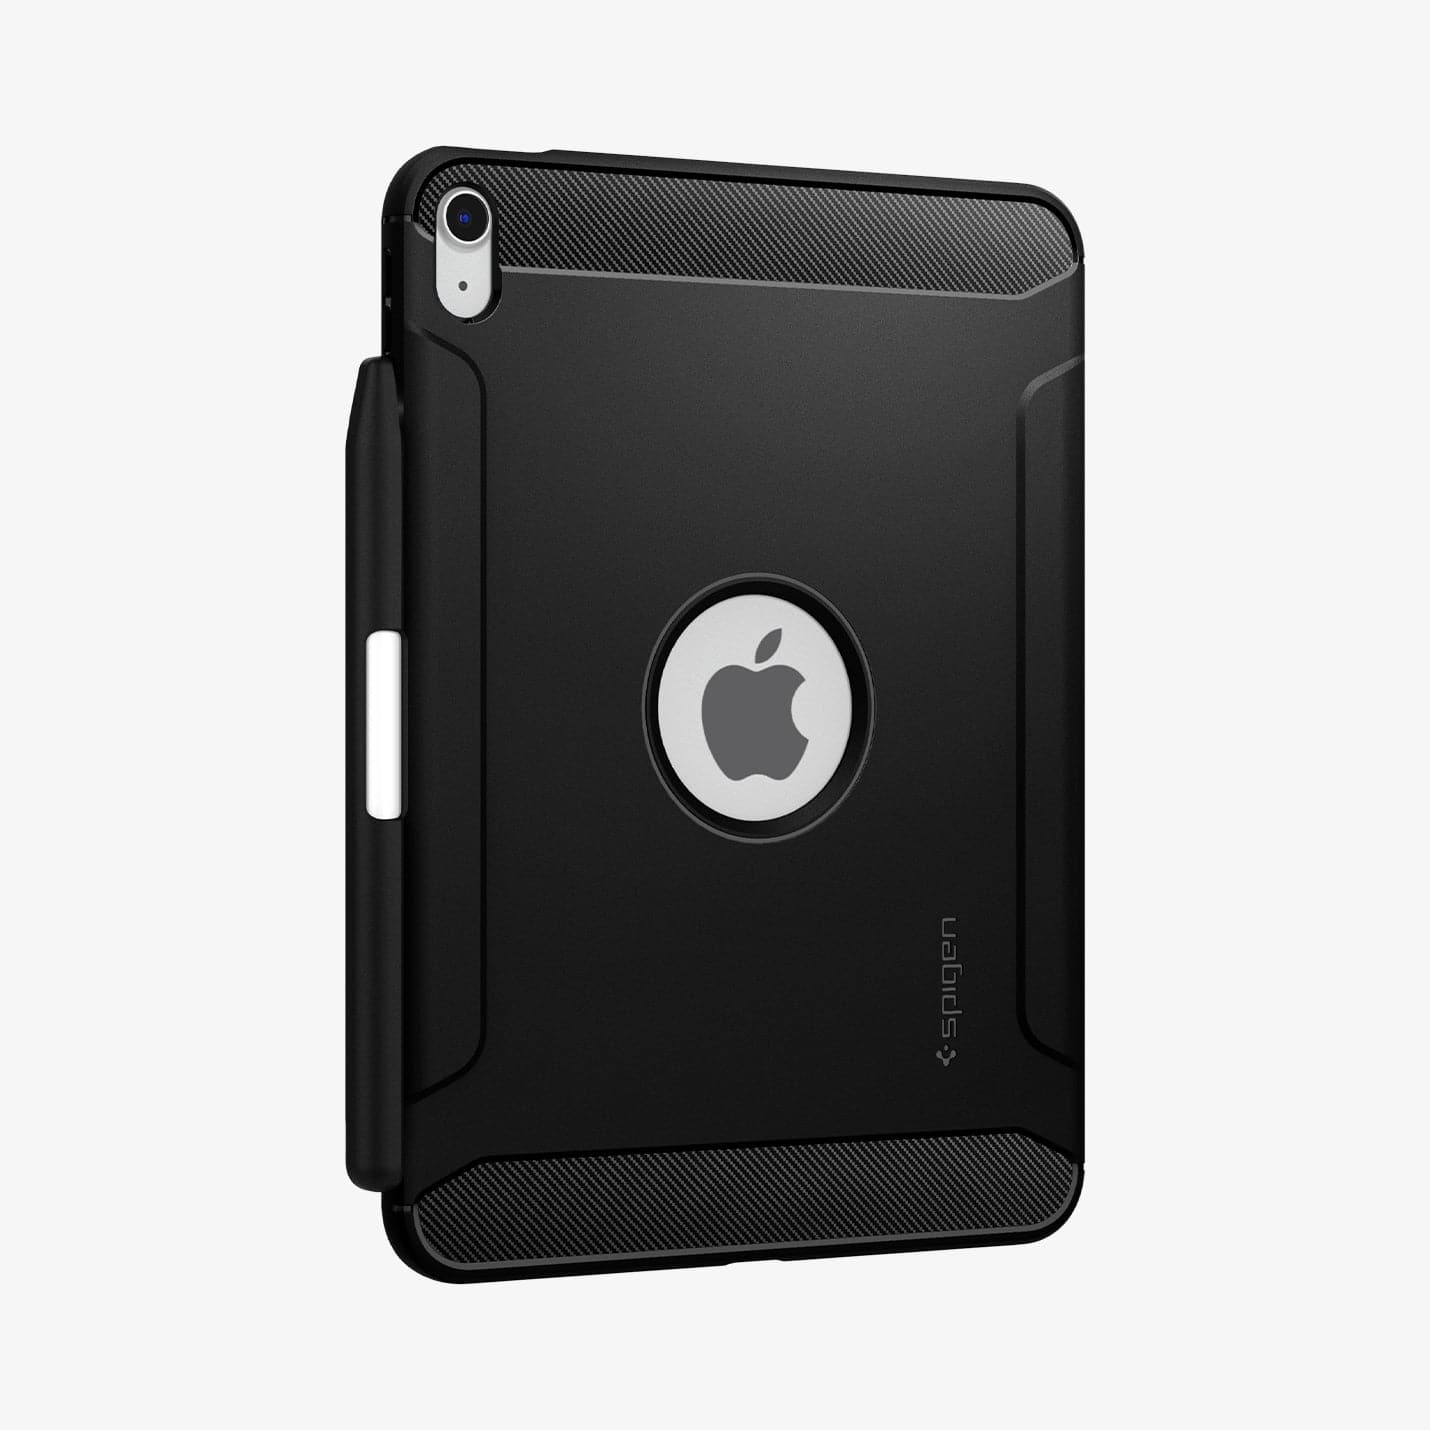 ACS05552 - iPad 10.9" Case Rugged Armor in black showing the back and partial side